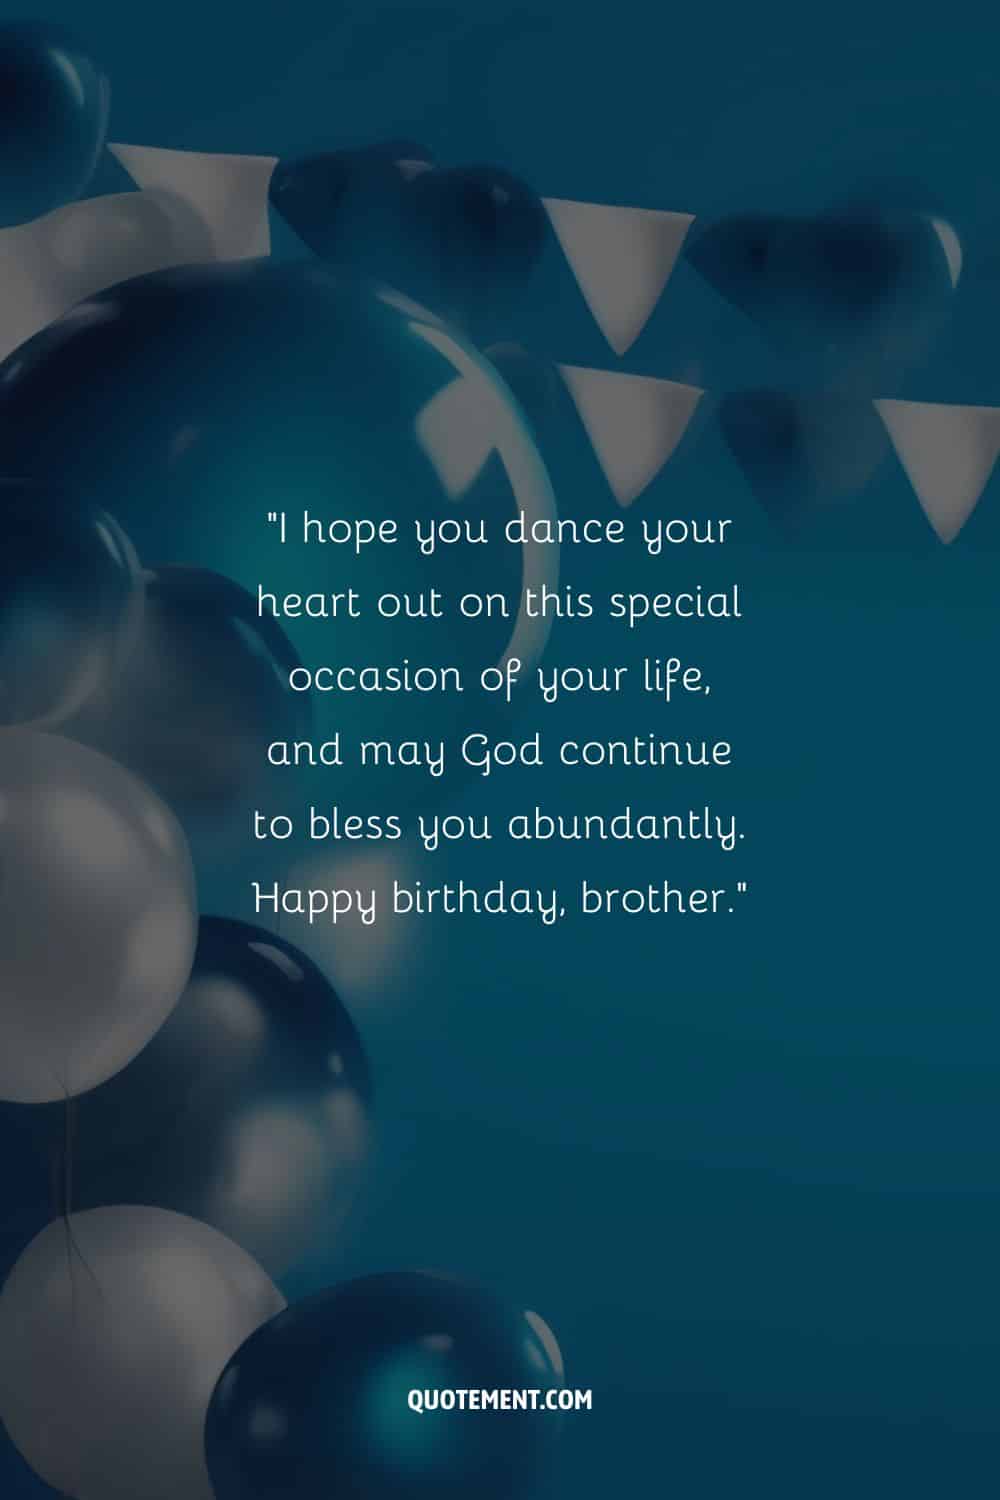 “I hope you dance your heart out on this special occasion of your life, and may God continue to bless you abundantly. Happy birthday, brother.”